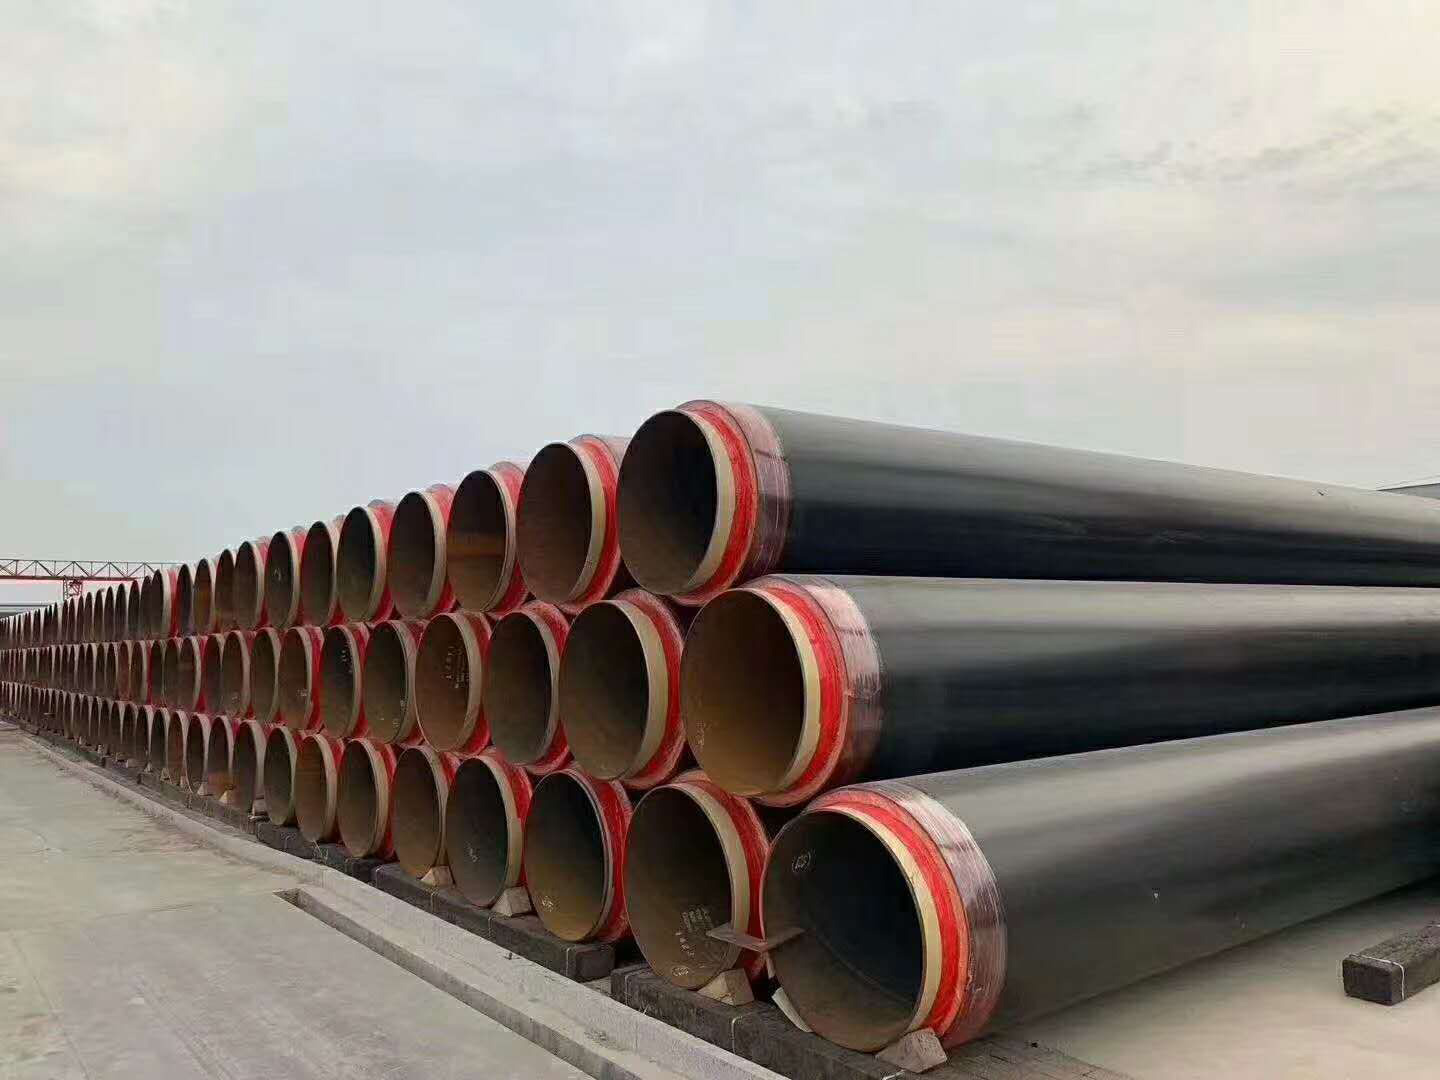 Prefabricated directly buried insulation pipe (produced by "pipe-in-pipe" method)